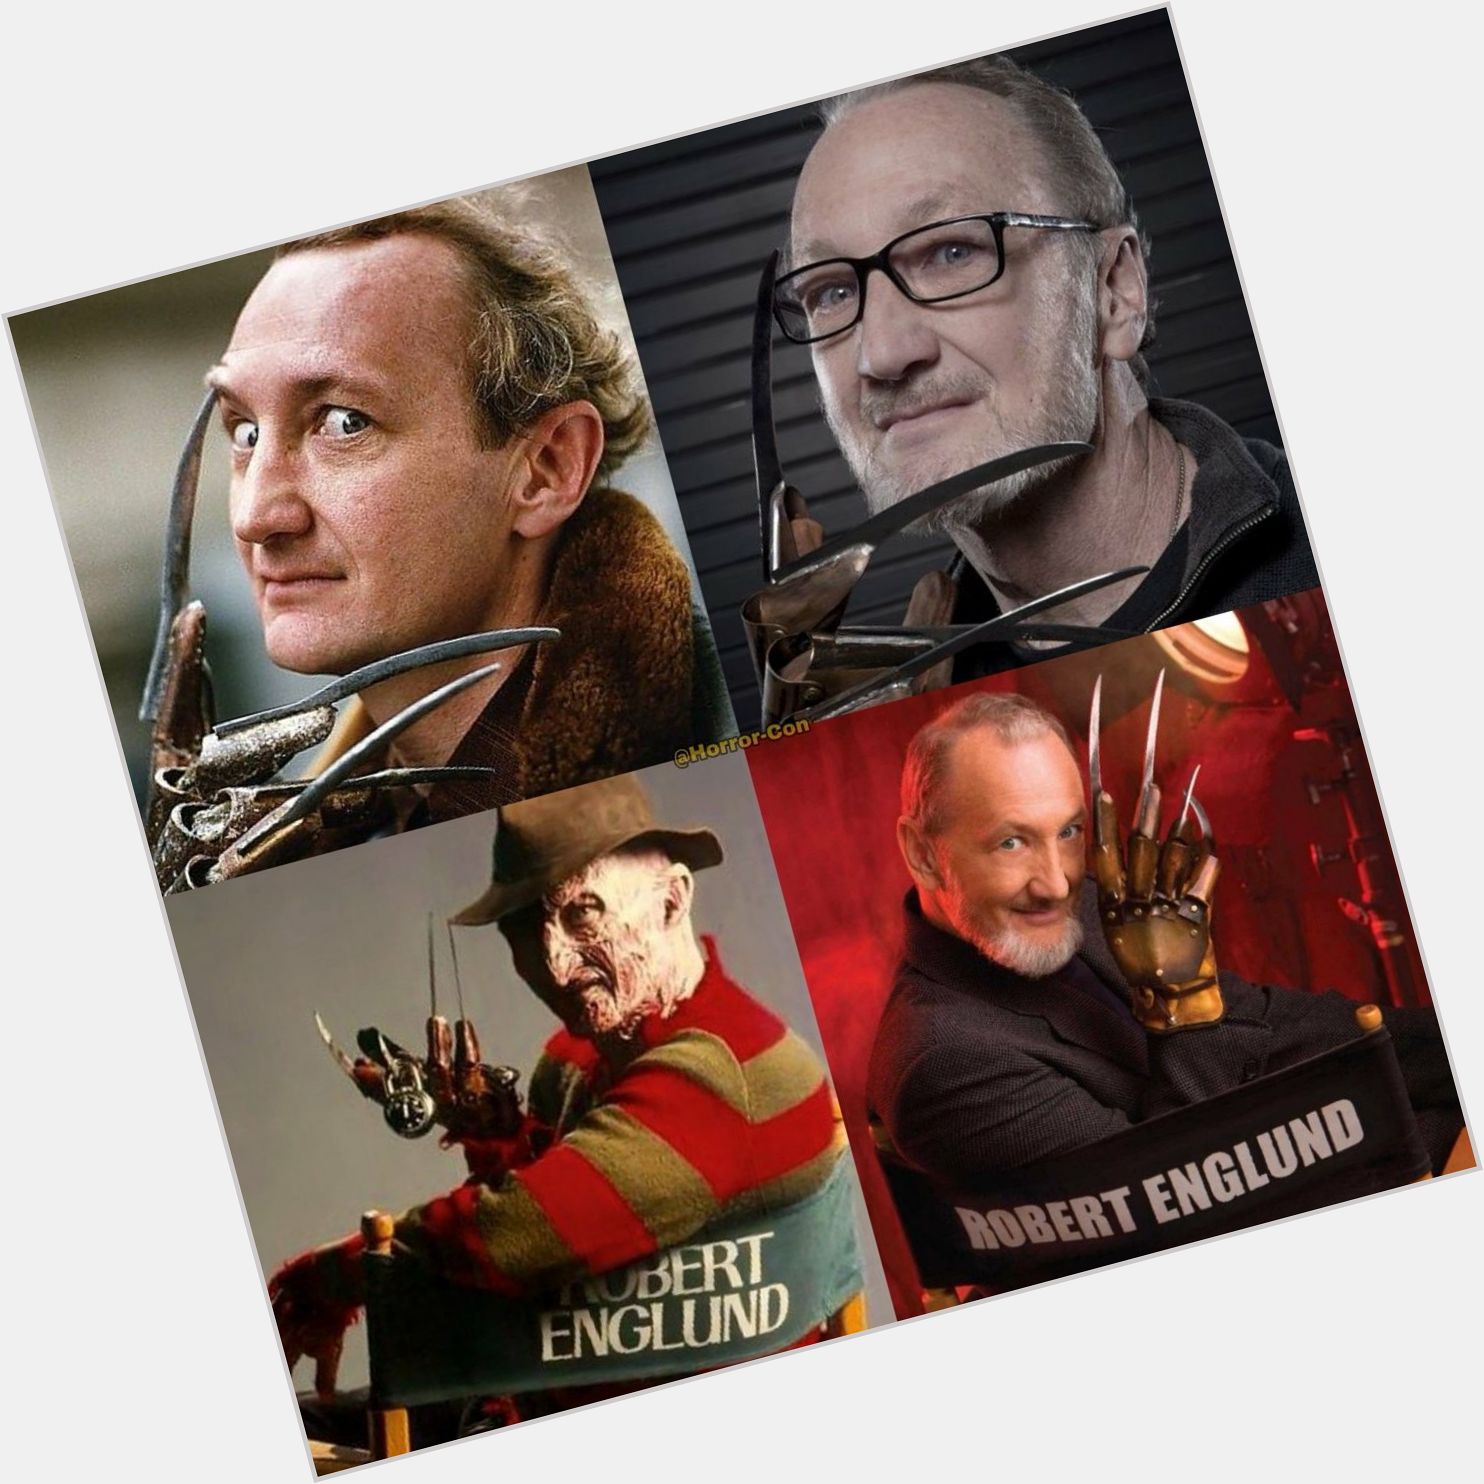 A very happy birthday to Mr. Robert Englund today! 